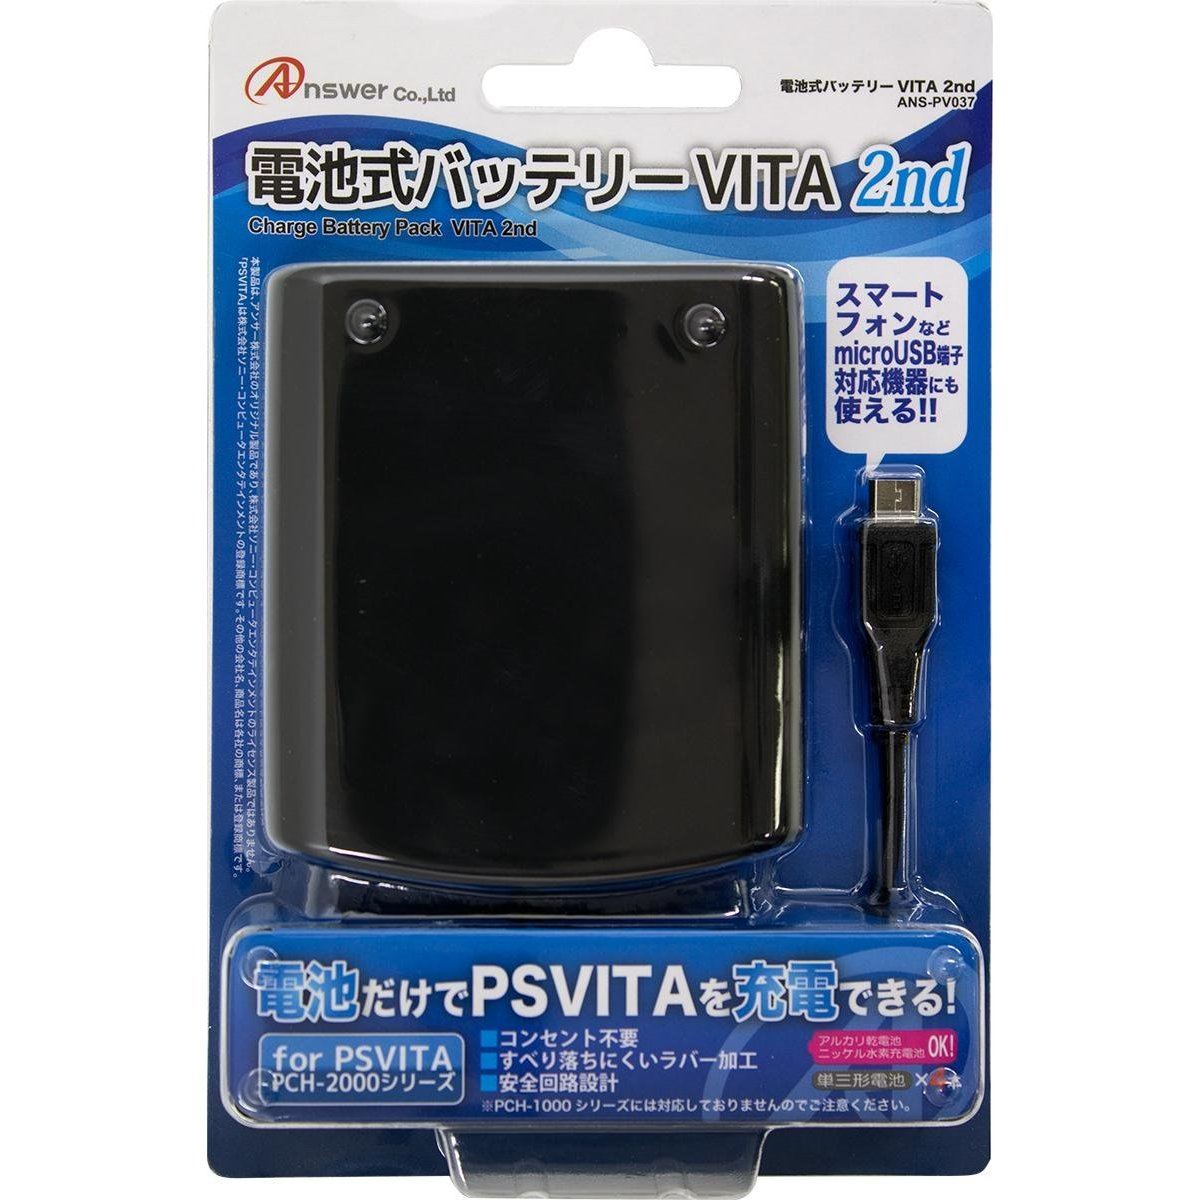 Battery Charger for PS Vita PCH-2000 for PlayStation®Vita Slim